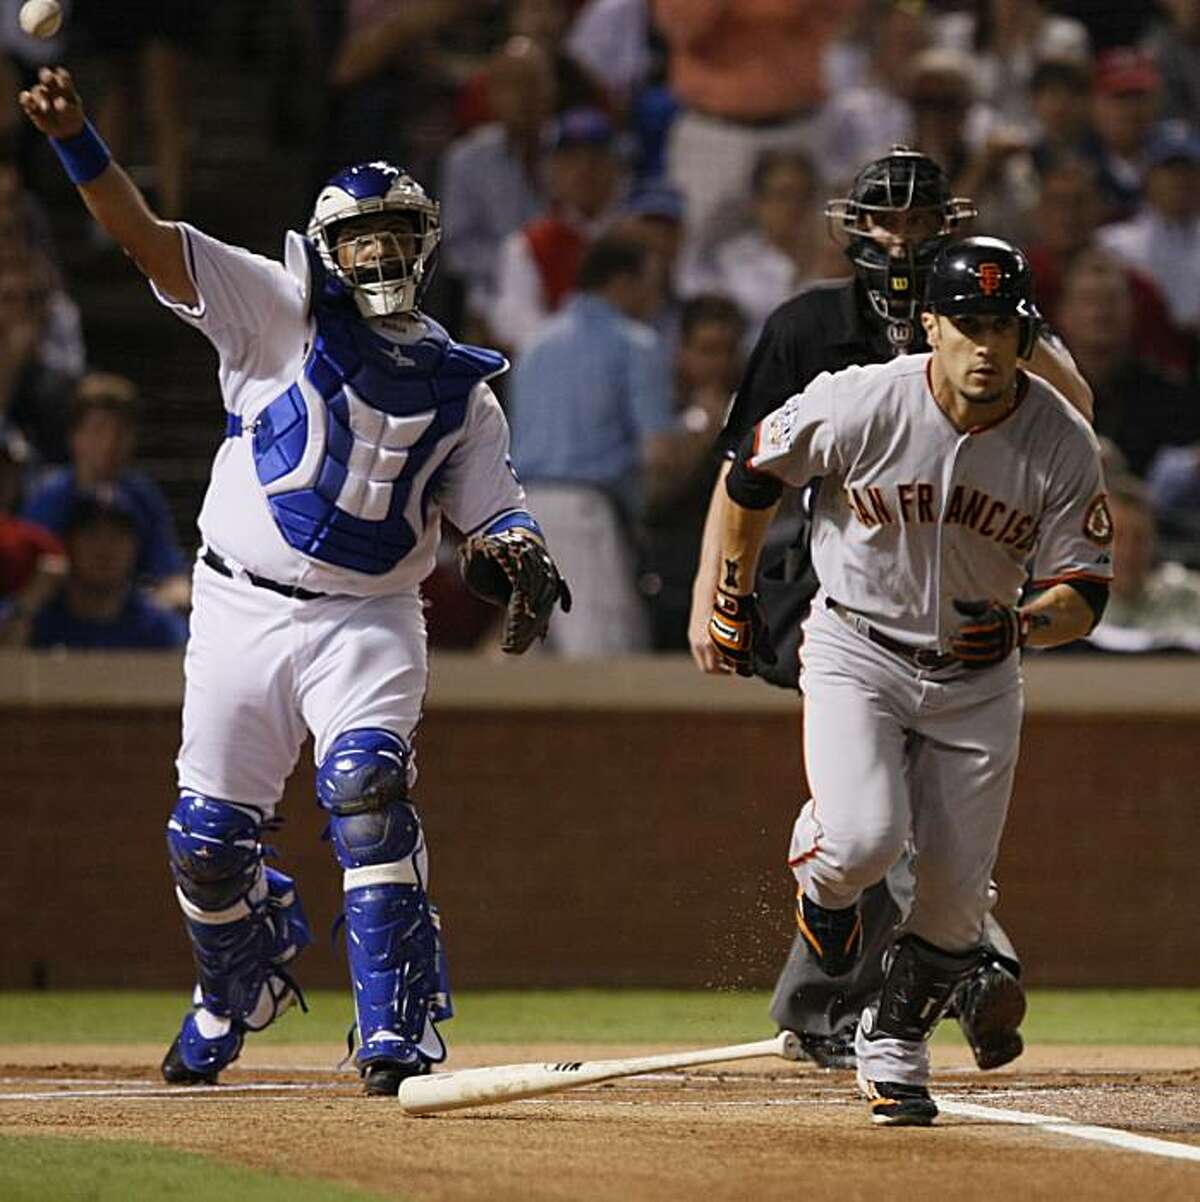 Texas Rangers catcher Bengie Molina throws the ball to first to get the out on San Francisco Giants right fielder Andres Torres in the first inning of Game 5 of the World Series on Monday.